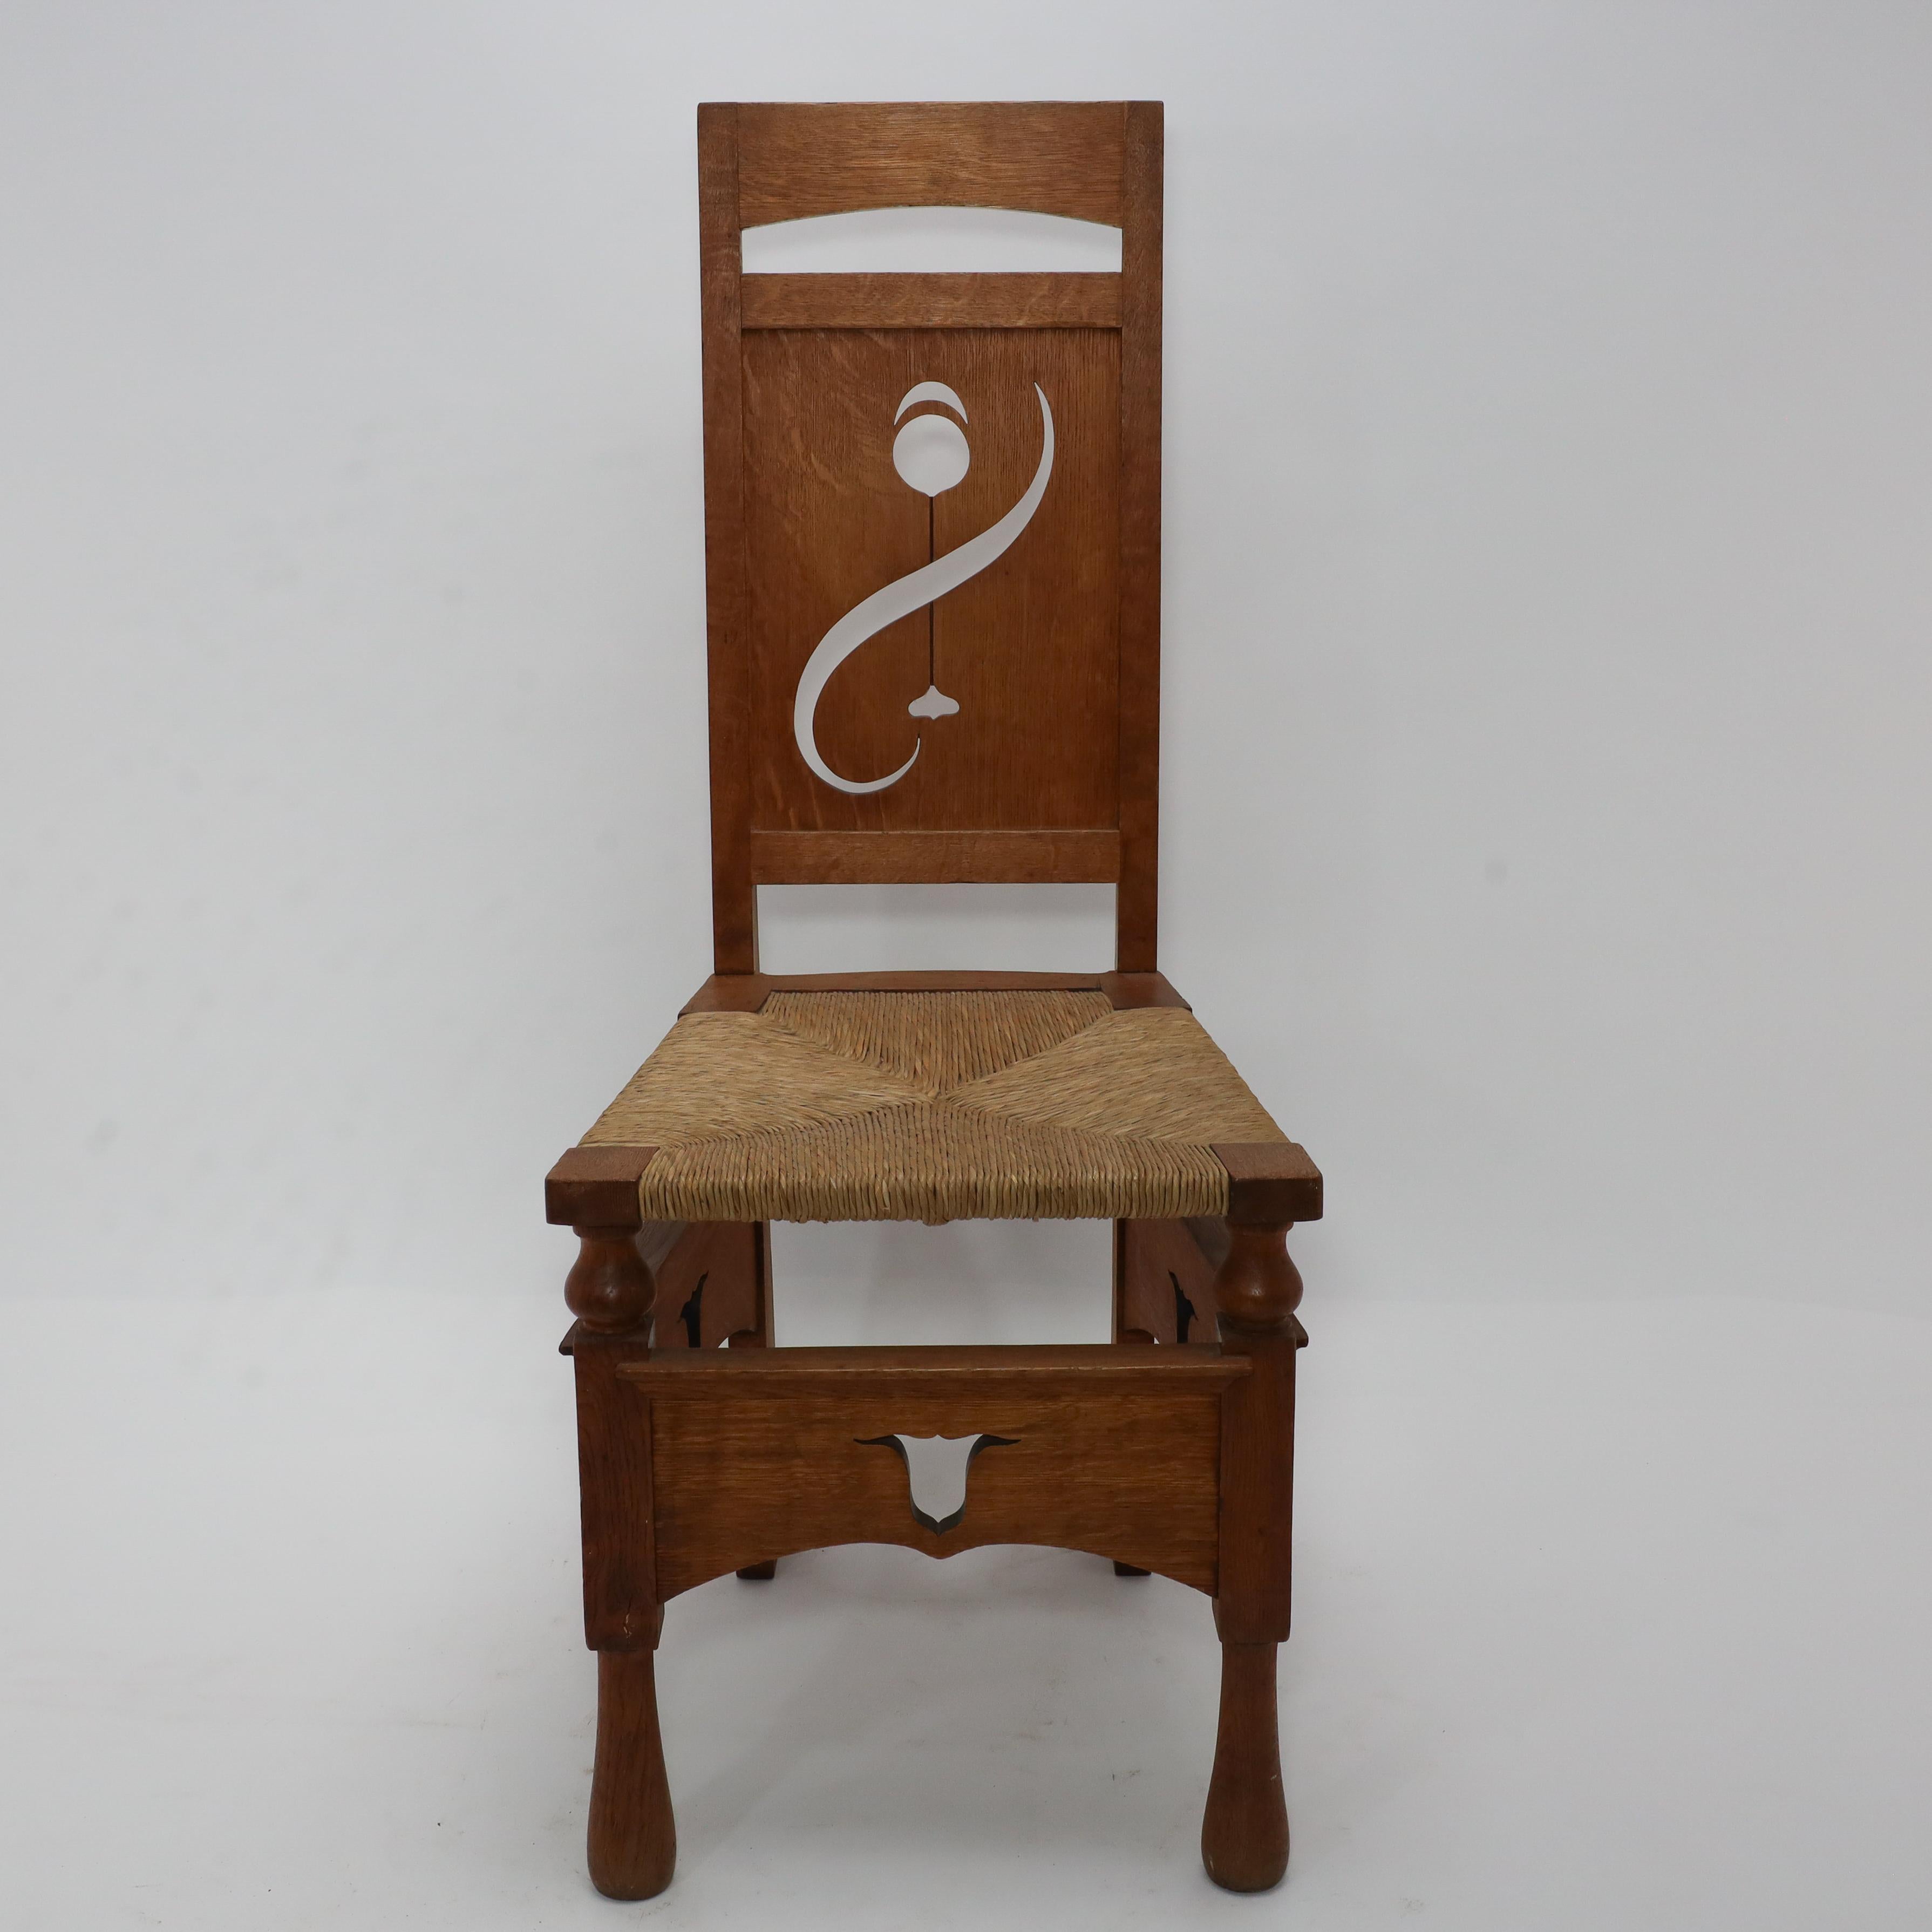 M H Baillie Scott attri, An Arts & Crafts Oak Chair With Stylised Floral Cut-Outs to the back and Pierced Tulips to the aprons below the front and the sides of the seat.
A very progressive chair in its style and form with turned details below the